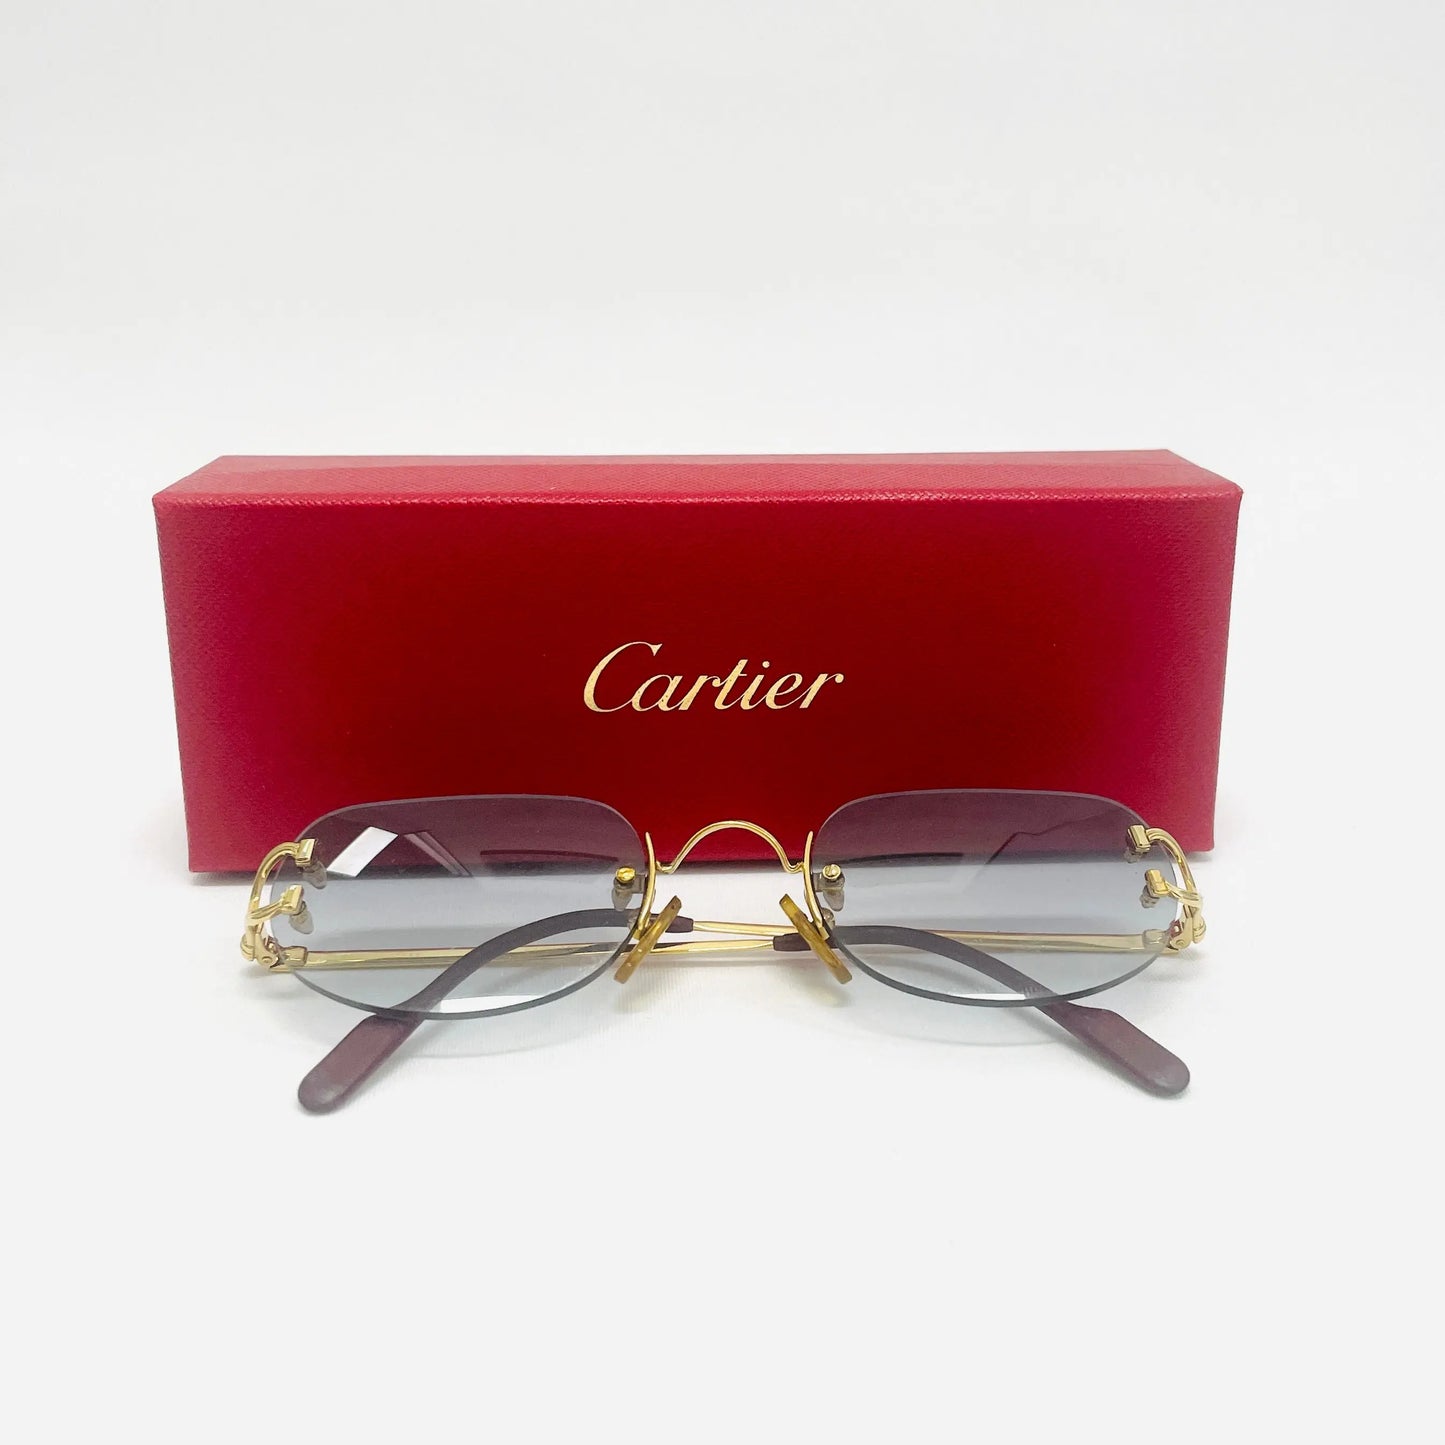 Vintage-Cartier-Big-C-Sonnenbrille-Sunglasses-22CT-Gold-Plated-the-seekers-with-box-and-papers